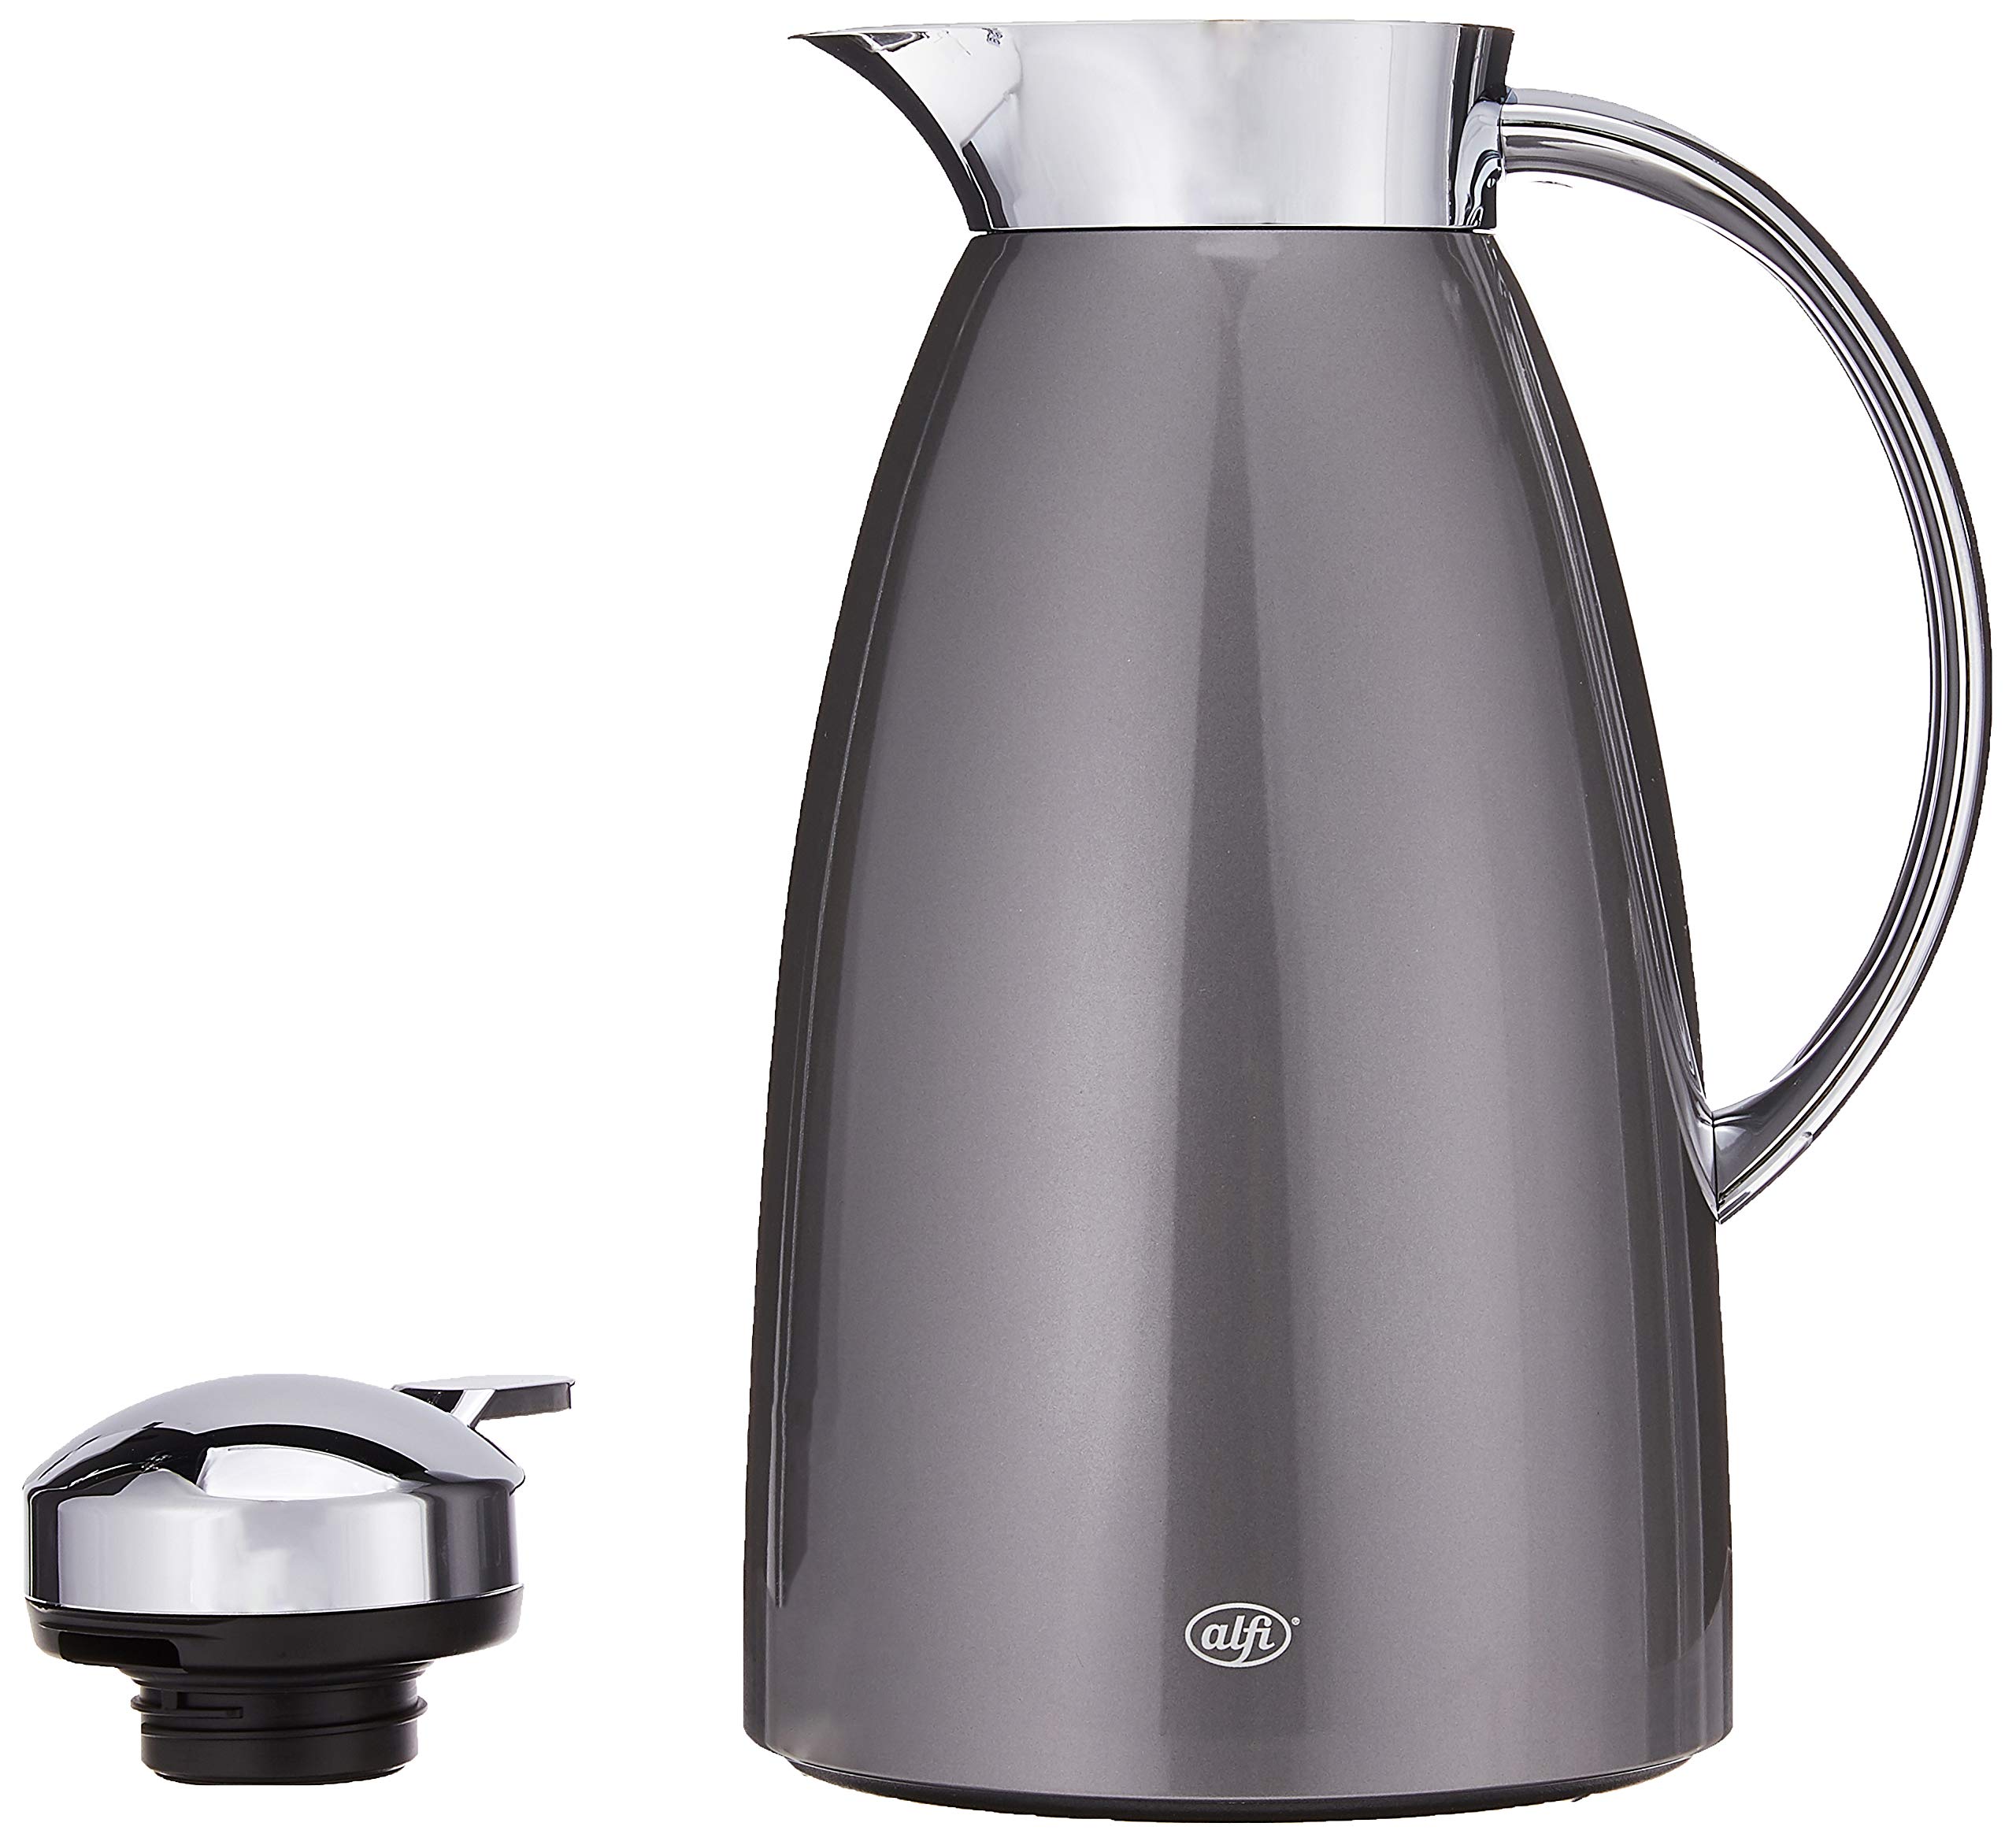 Alfi Gusto 1.0 L Glass Vacuum Lacquered Metal Thermal Dispenser Carafe, Space Grey, One Size (AG1900GY2)